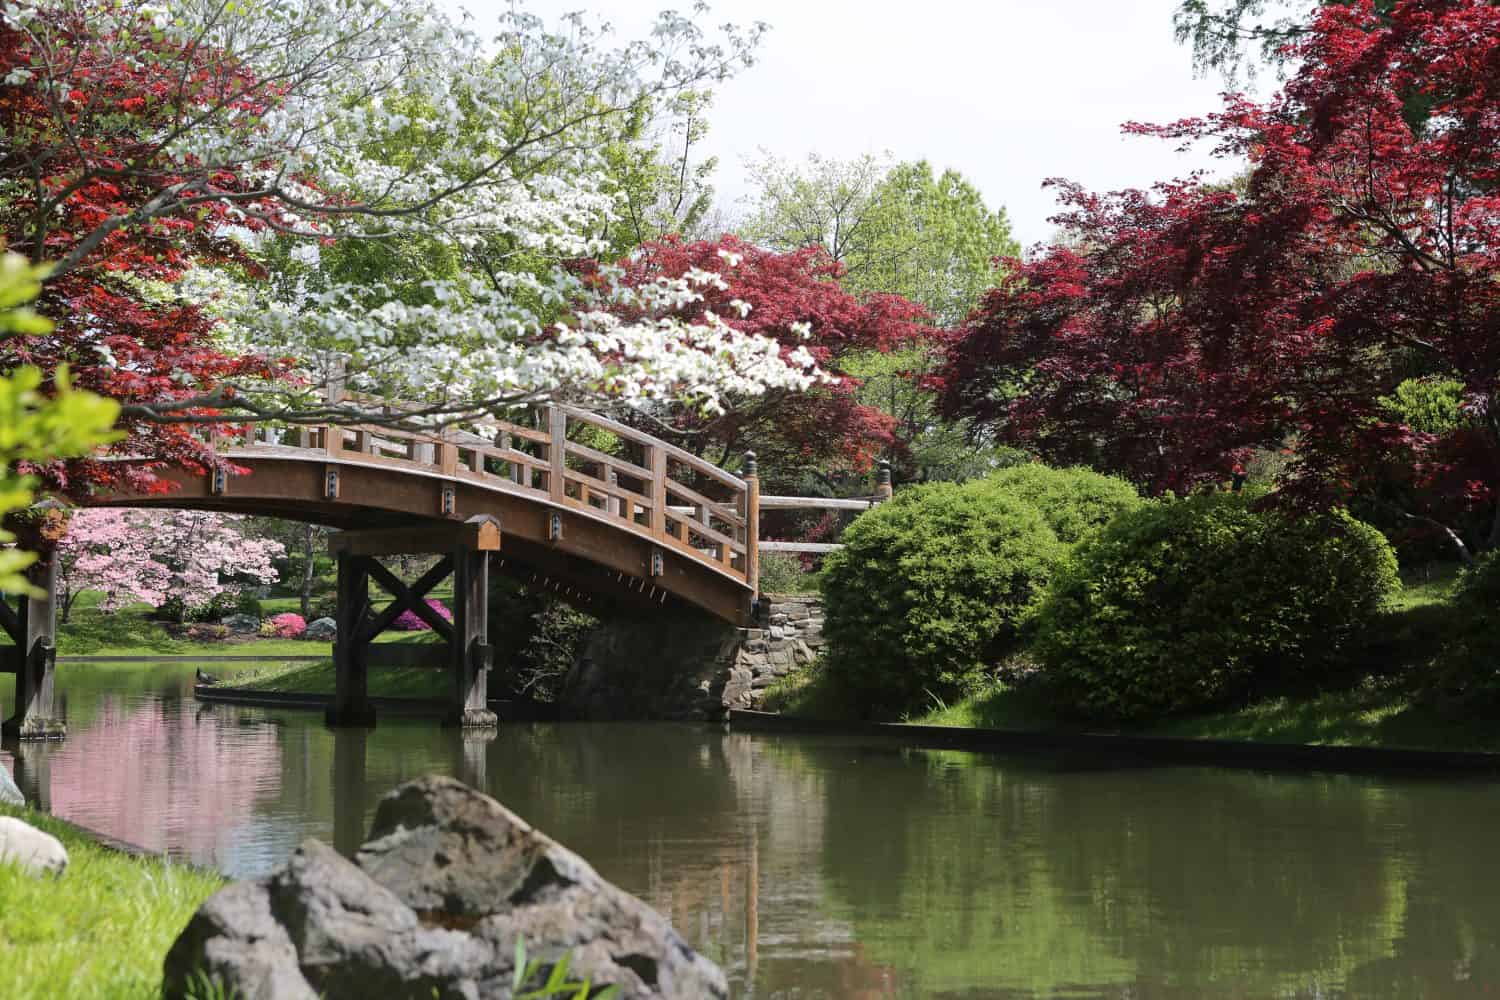 <p>Cherry blossoms fill the Missouri Botanical Garden with their beautiful flowers every spring. The 14-acre Japanese garden features several varieties, including the beautiful pink-hued weeping Higan cherry blossom tree.</p><p>Sharks, lions, alligators, and more! Don’t miss today’s latest and most exciting animal news. <strong><a href="https://www.msn.com/en-us/channel/source/AZ%20Animals%20US/sr-vid-7etr9q8xun6k6508c3nufaum0de3dqktiq6h27ddeagnfug30wka">Click here to access the A-Z Animals profile page</a> and be sure to hit the <em>Follow</em> button here or at the top of this article!</strong></p> <p>Have feedback? Add a comment below!</p>